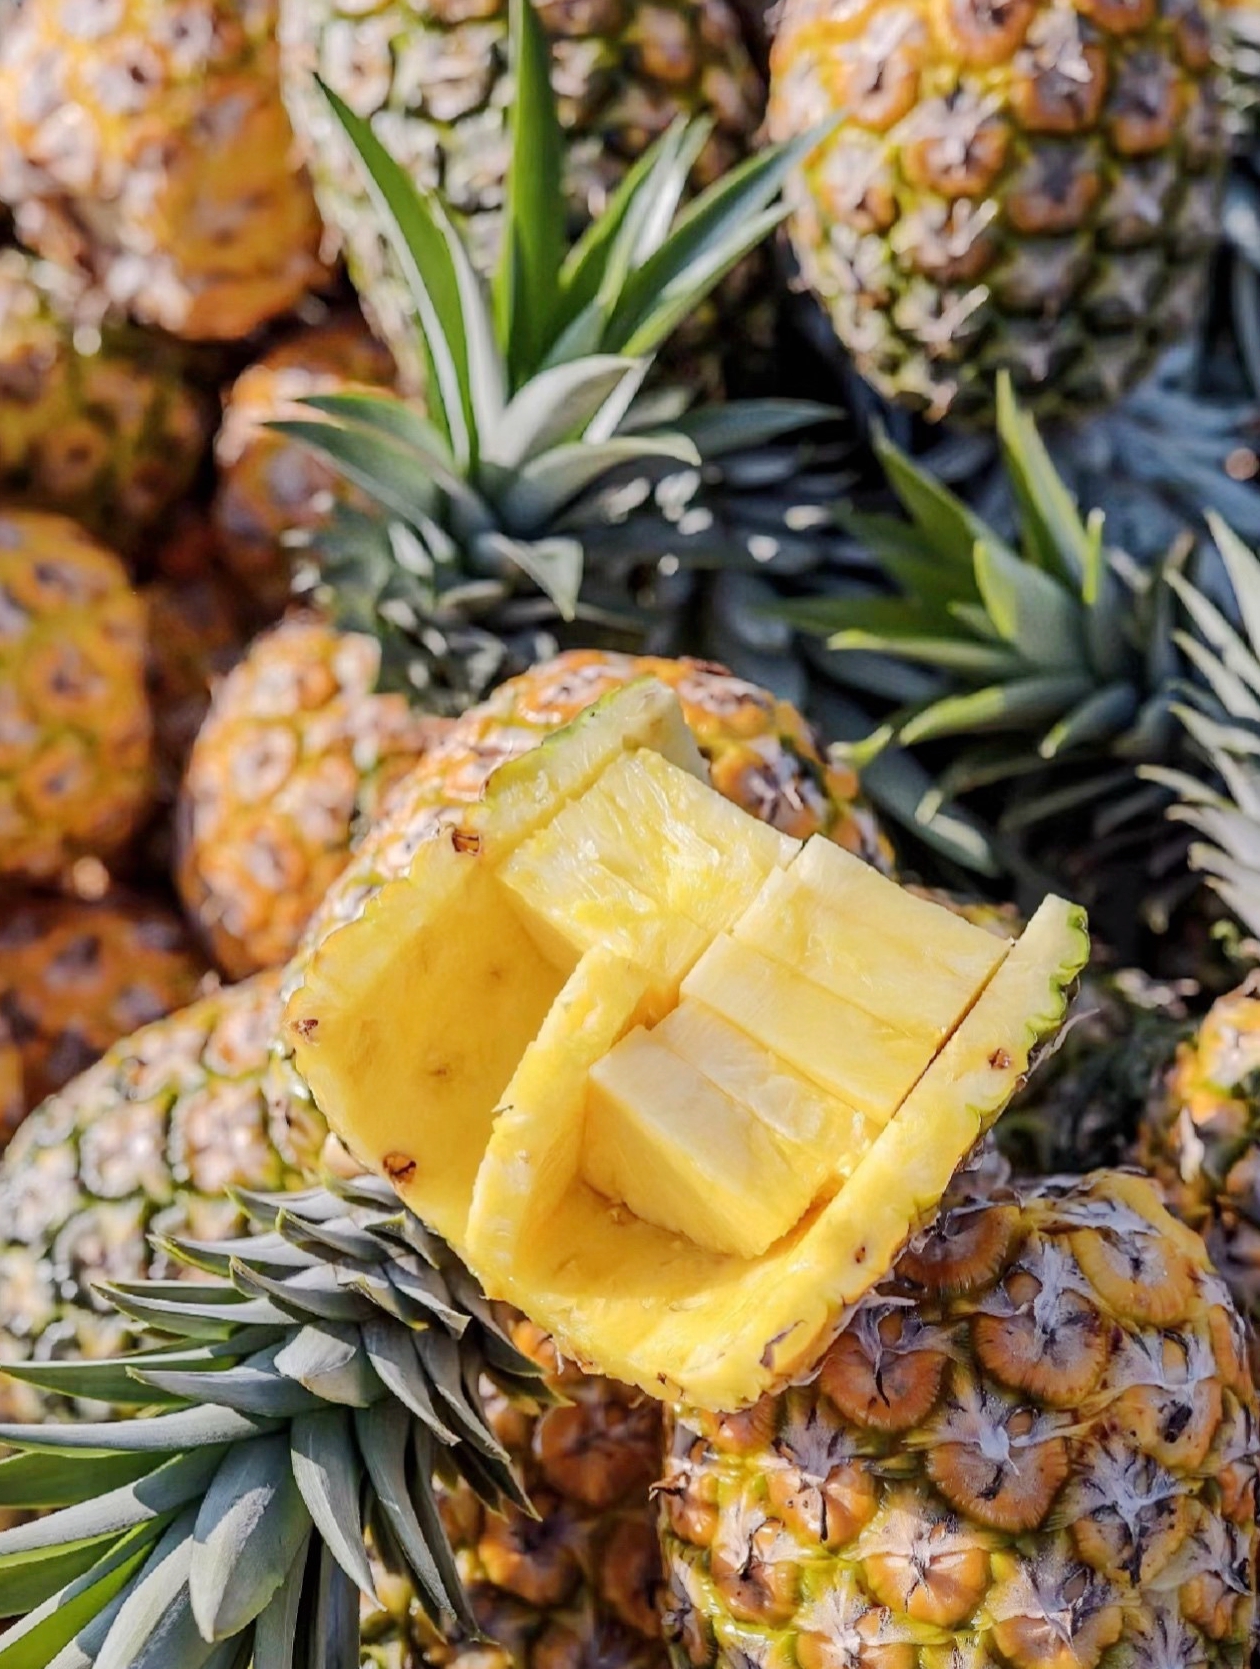 Hainan welcomes a bumper pineapple harvest. /Photo provided to CGTN